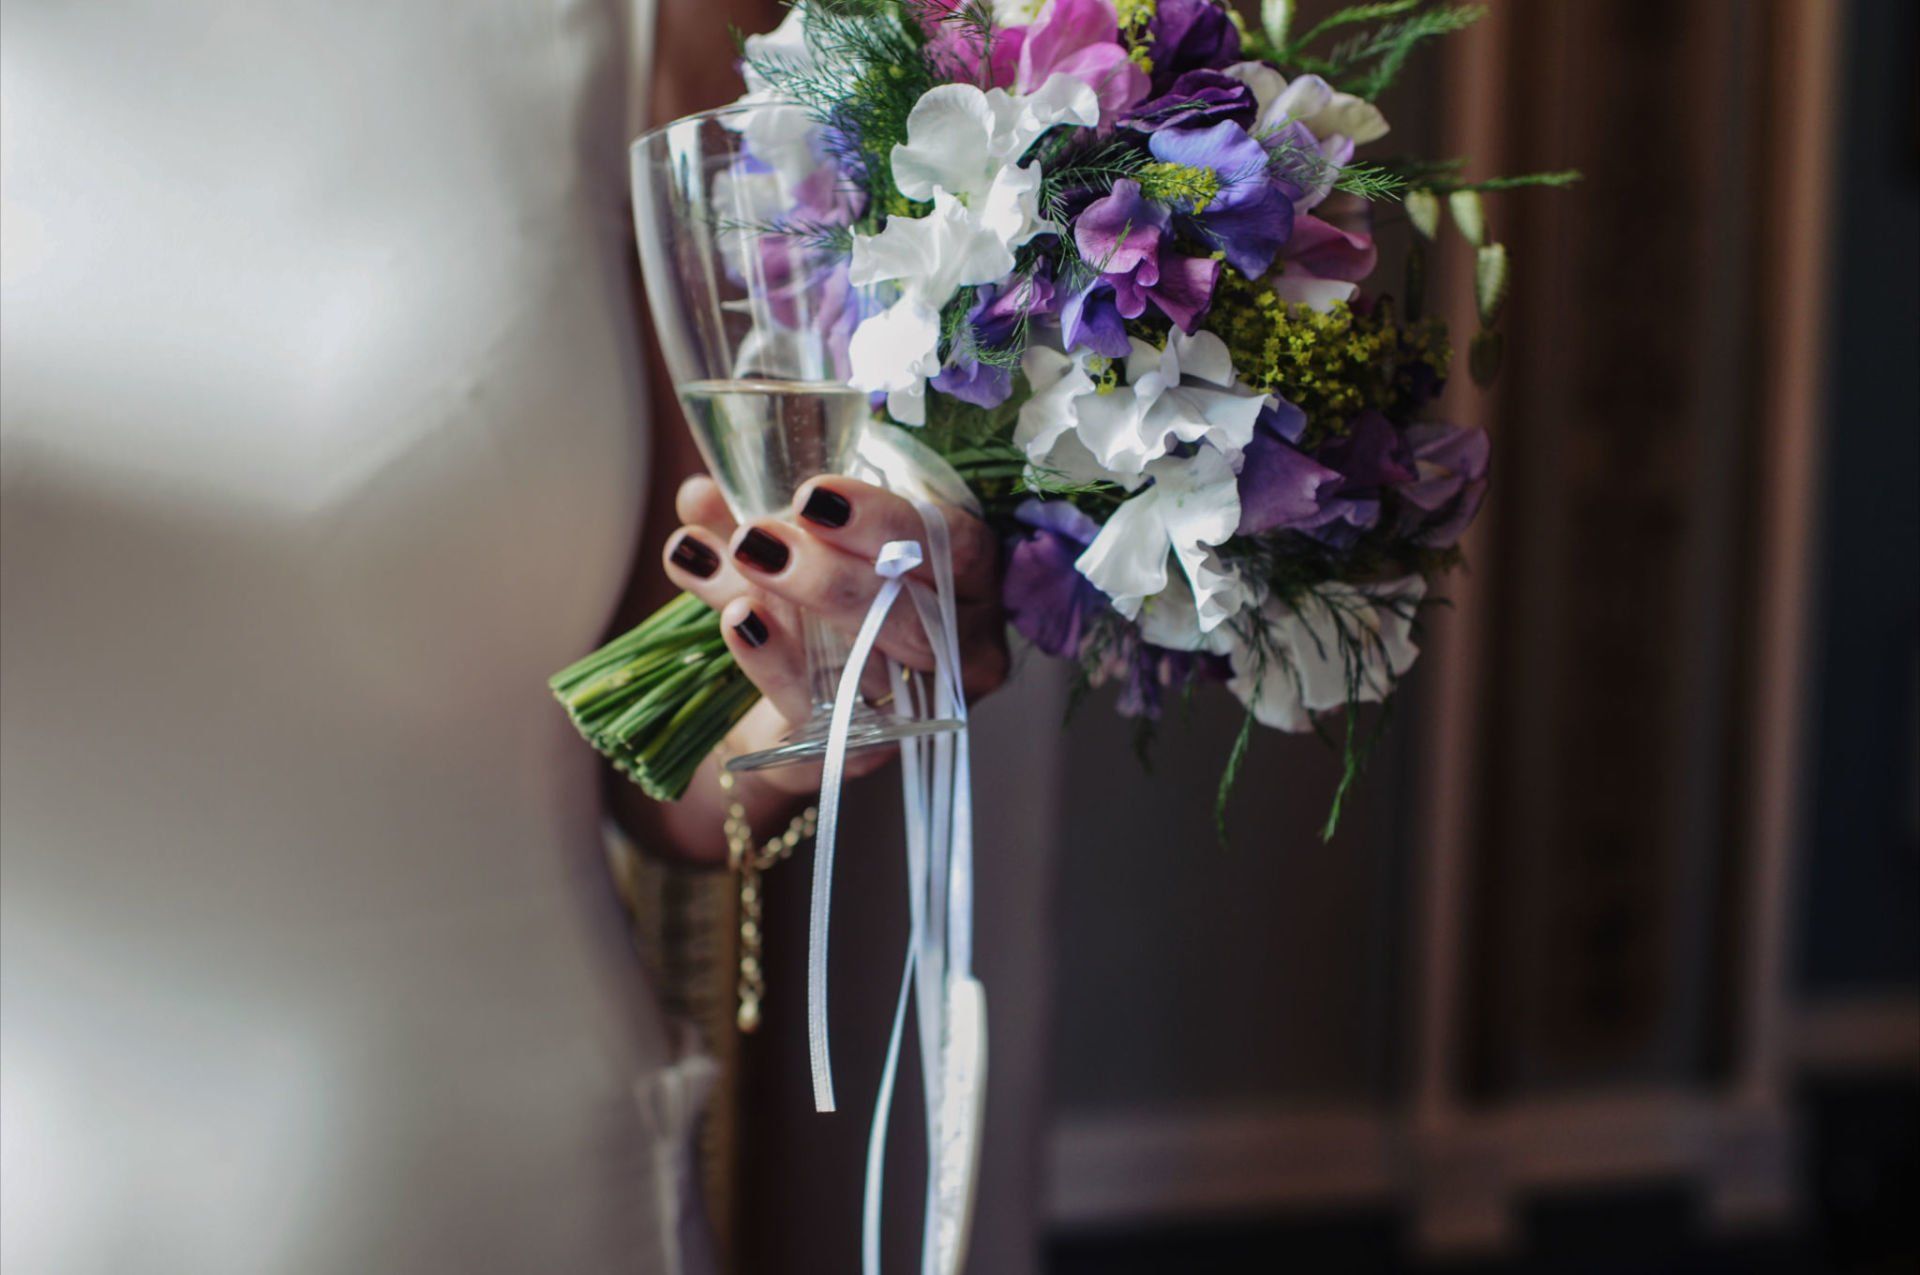 Wight Wedding Days | Your bouquet - to throw or not to throw?